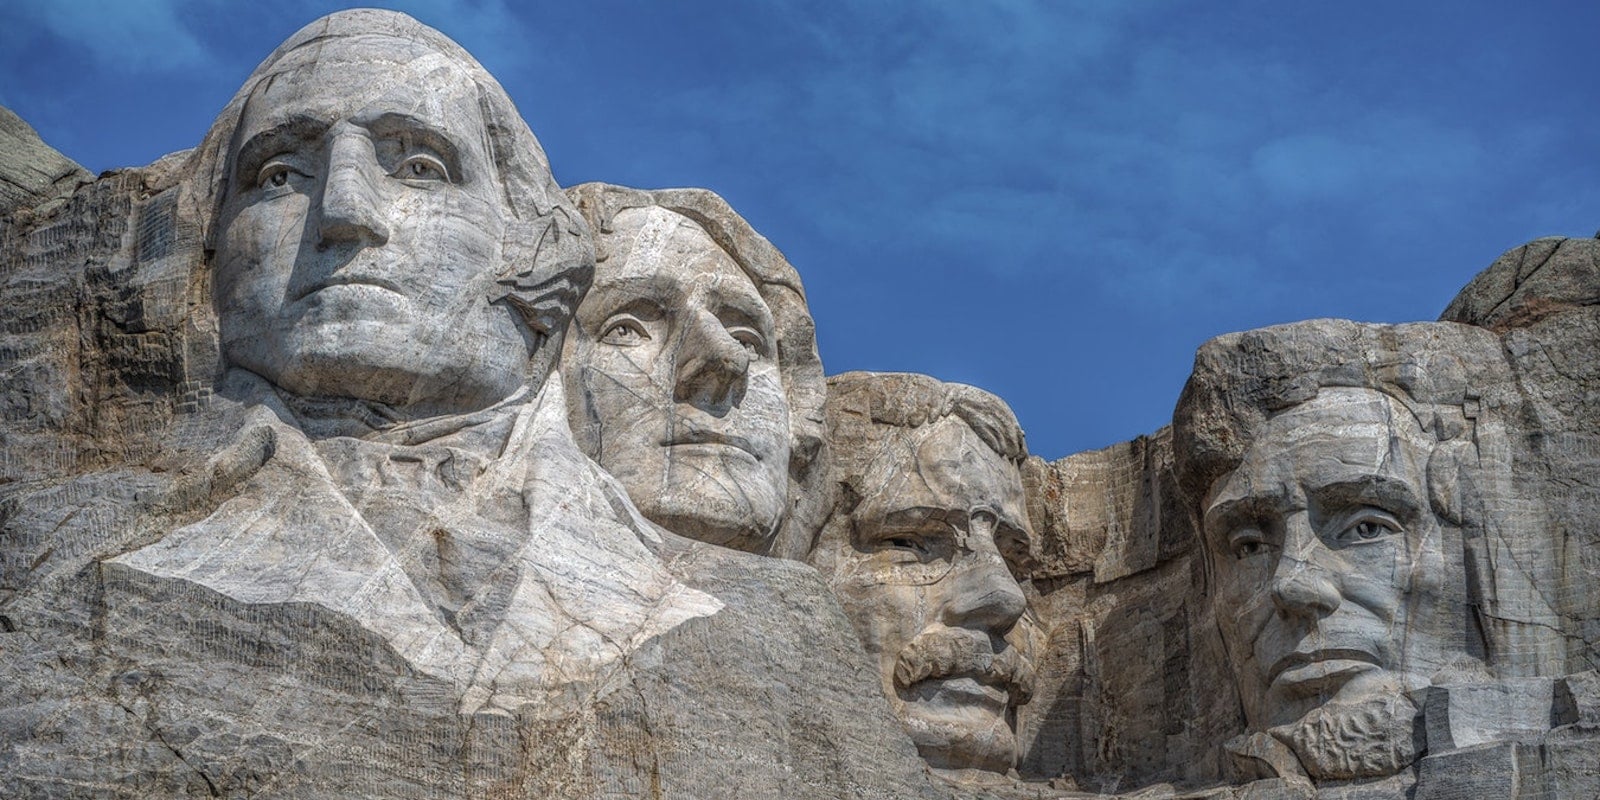 Observe President's Day by saving big on some awesome gear, apps and lessons.